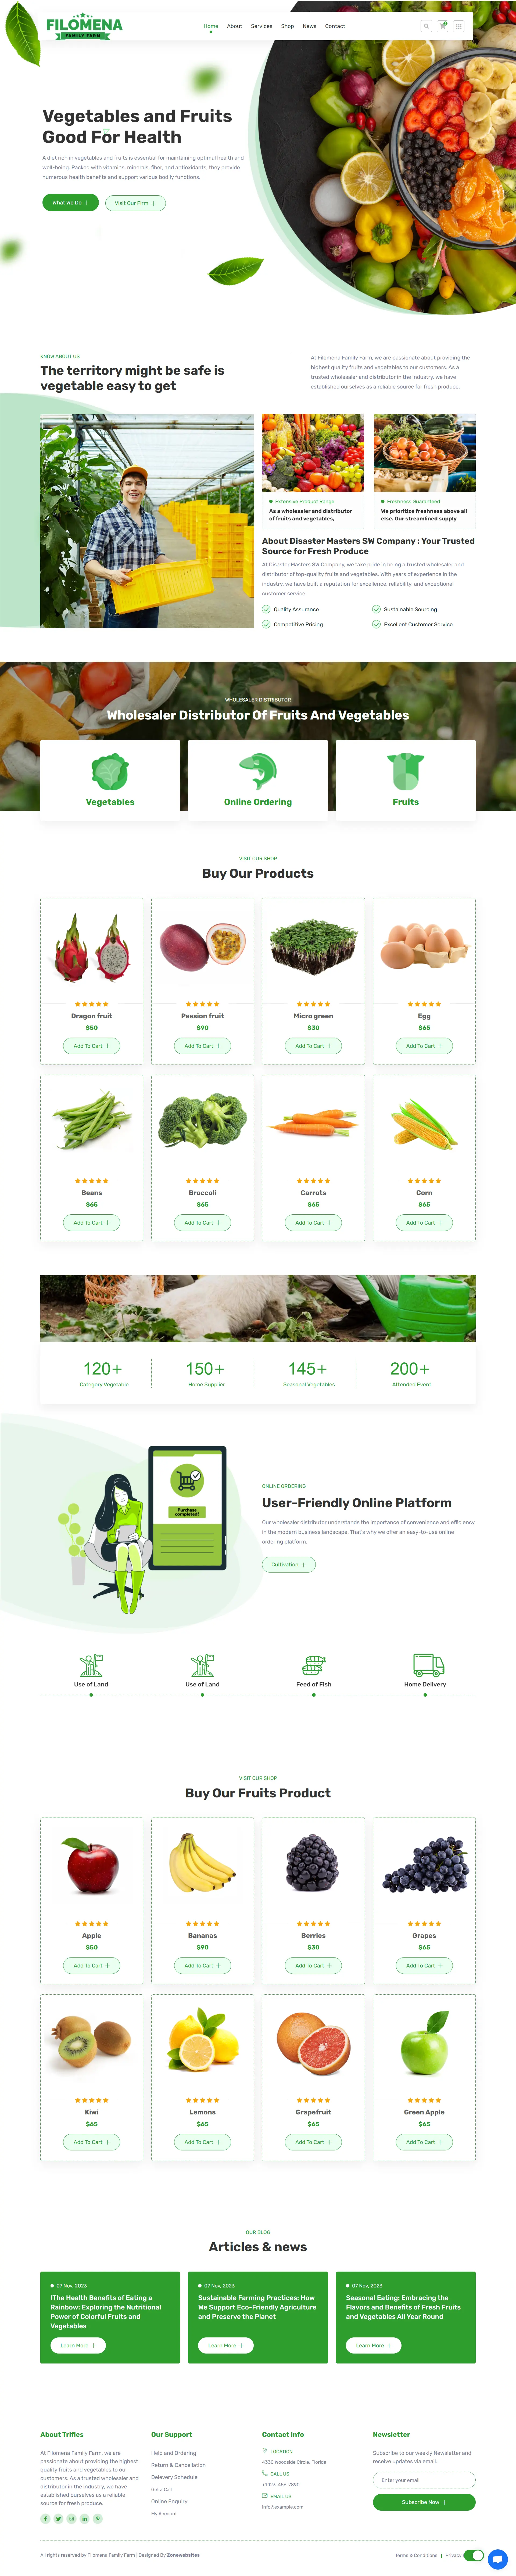 Attractive Website Layout for a Fruits & Vegetables Shop